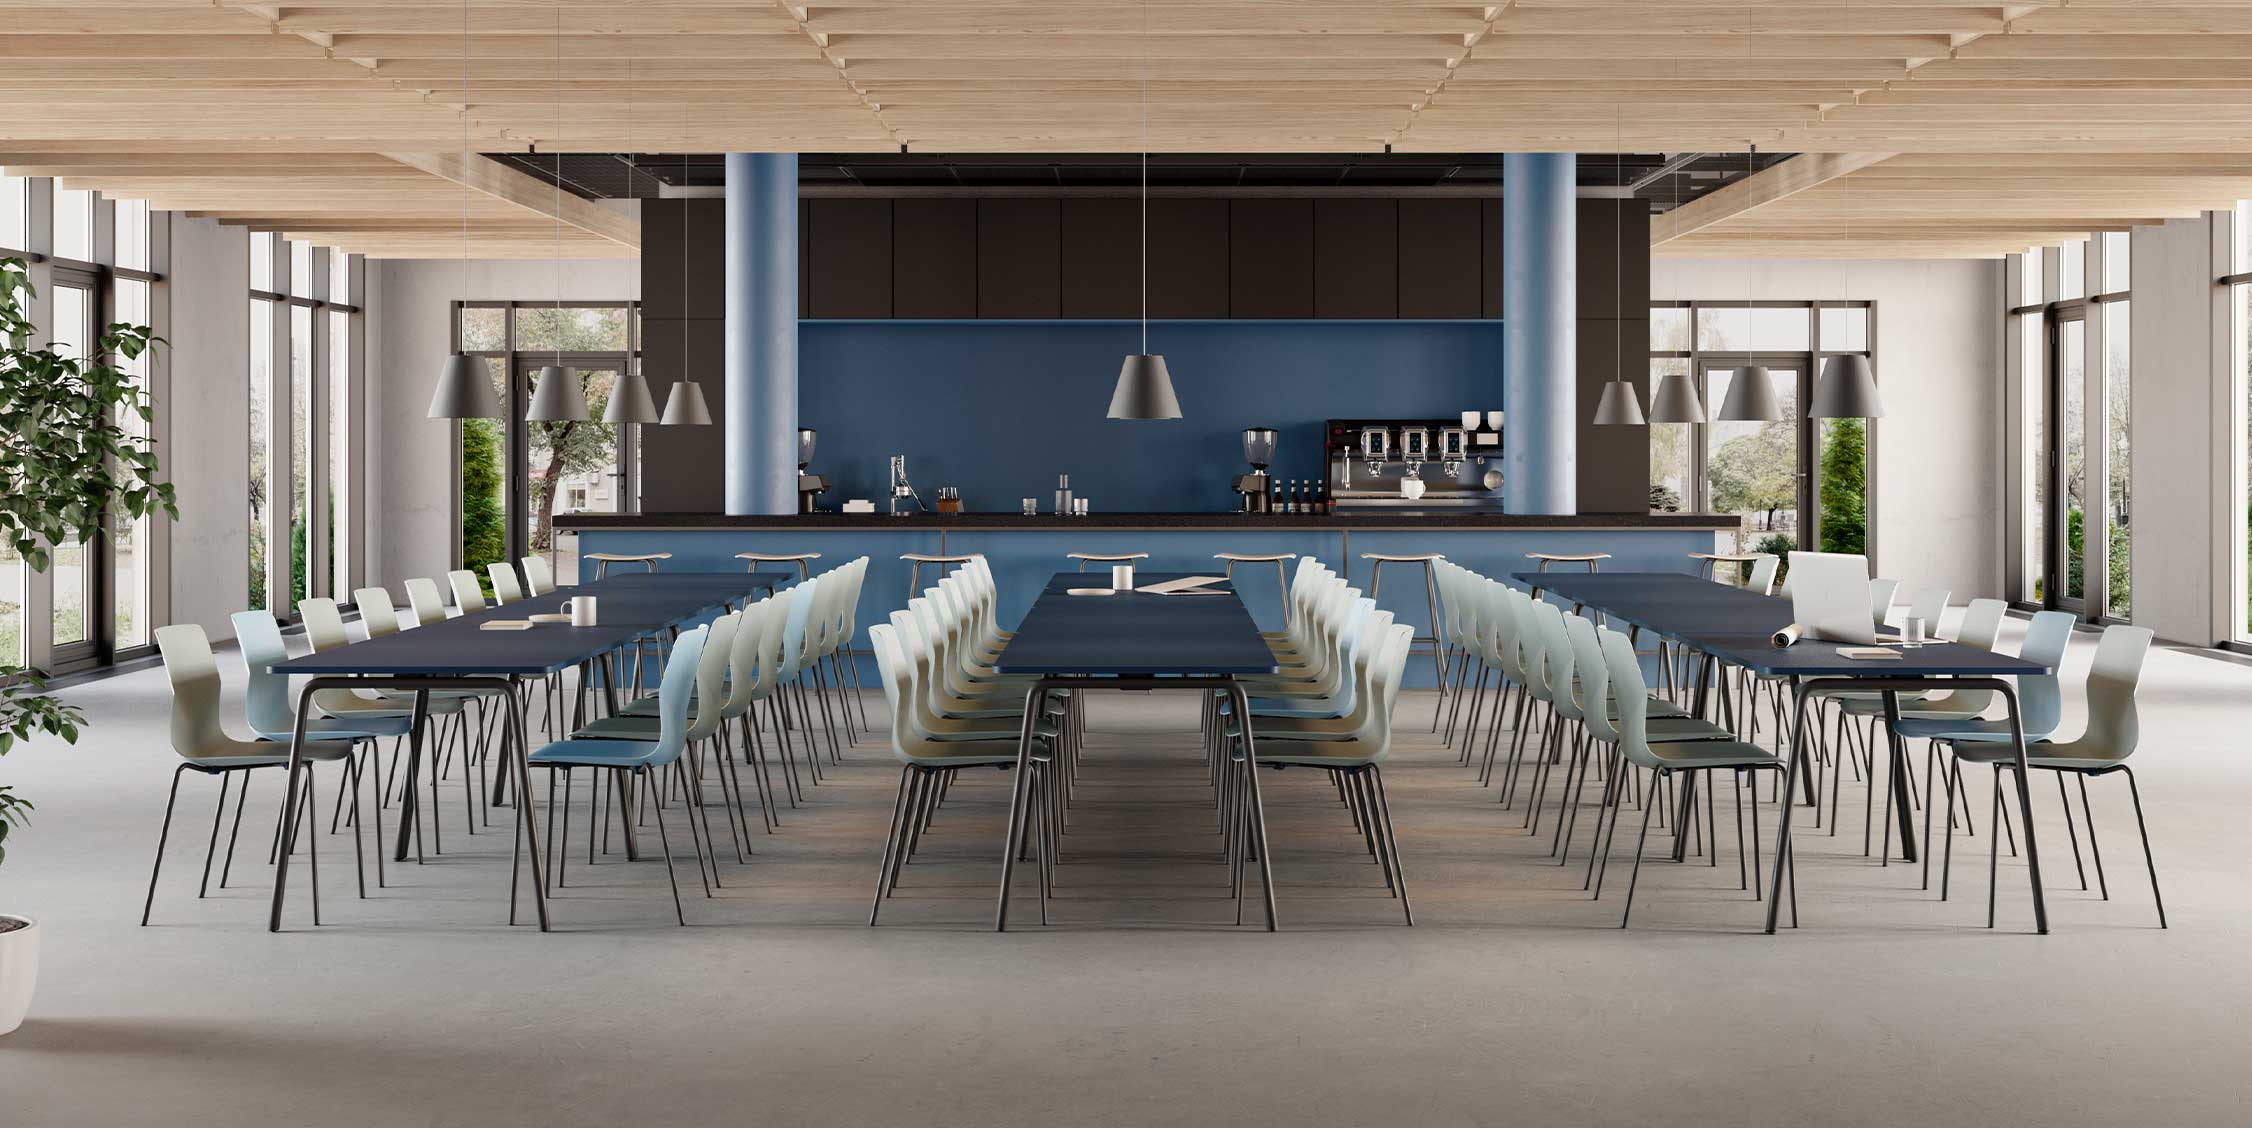 Canteen furniture in a dining room with a long table and chairs.